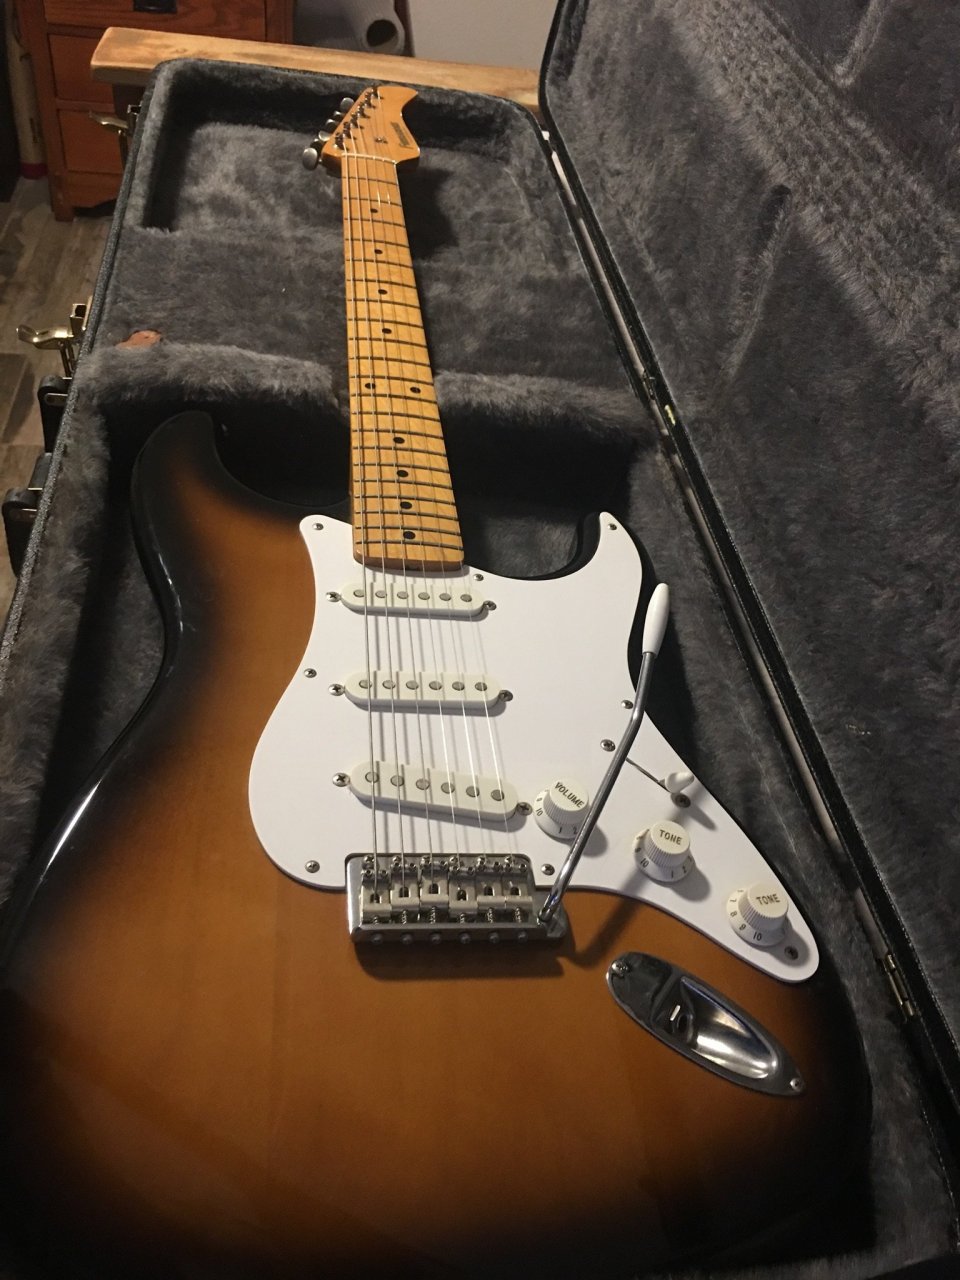 Value Of Fernandes Stratocaster Type Guitar | Axe Central